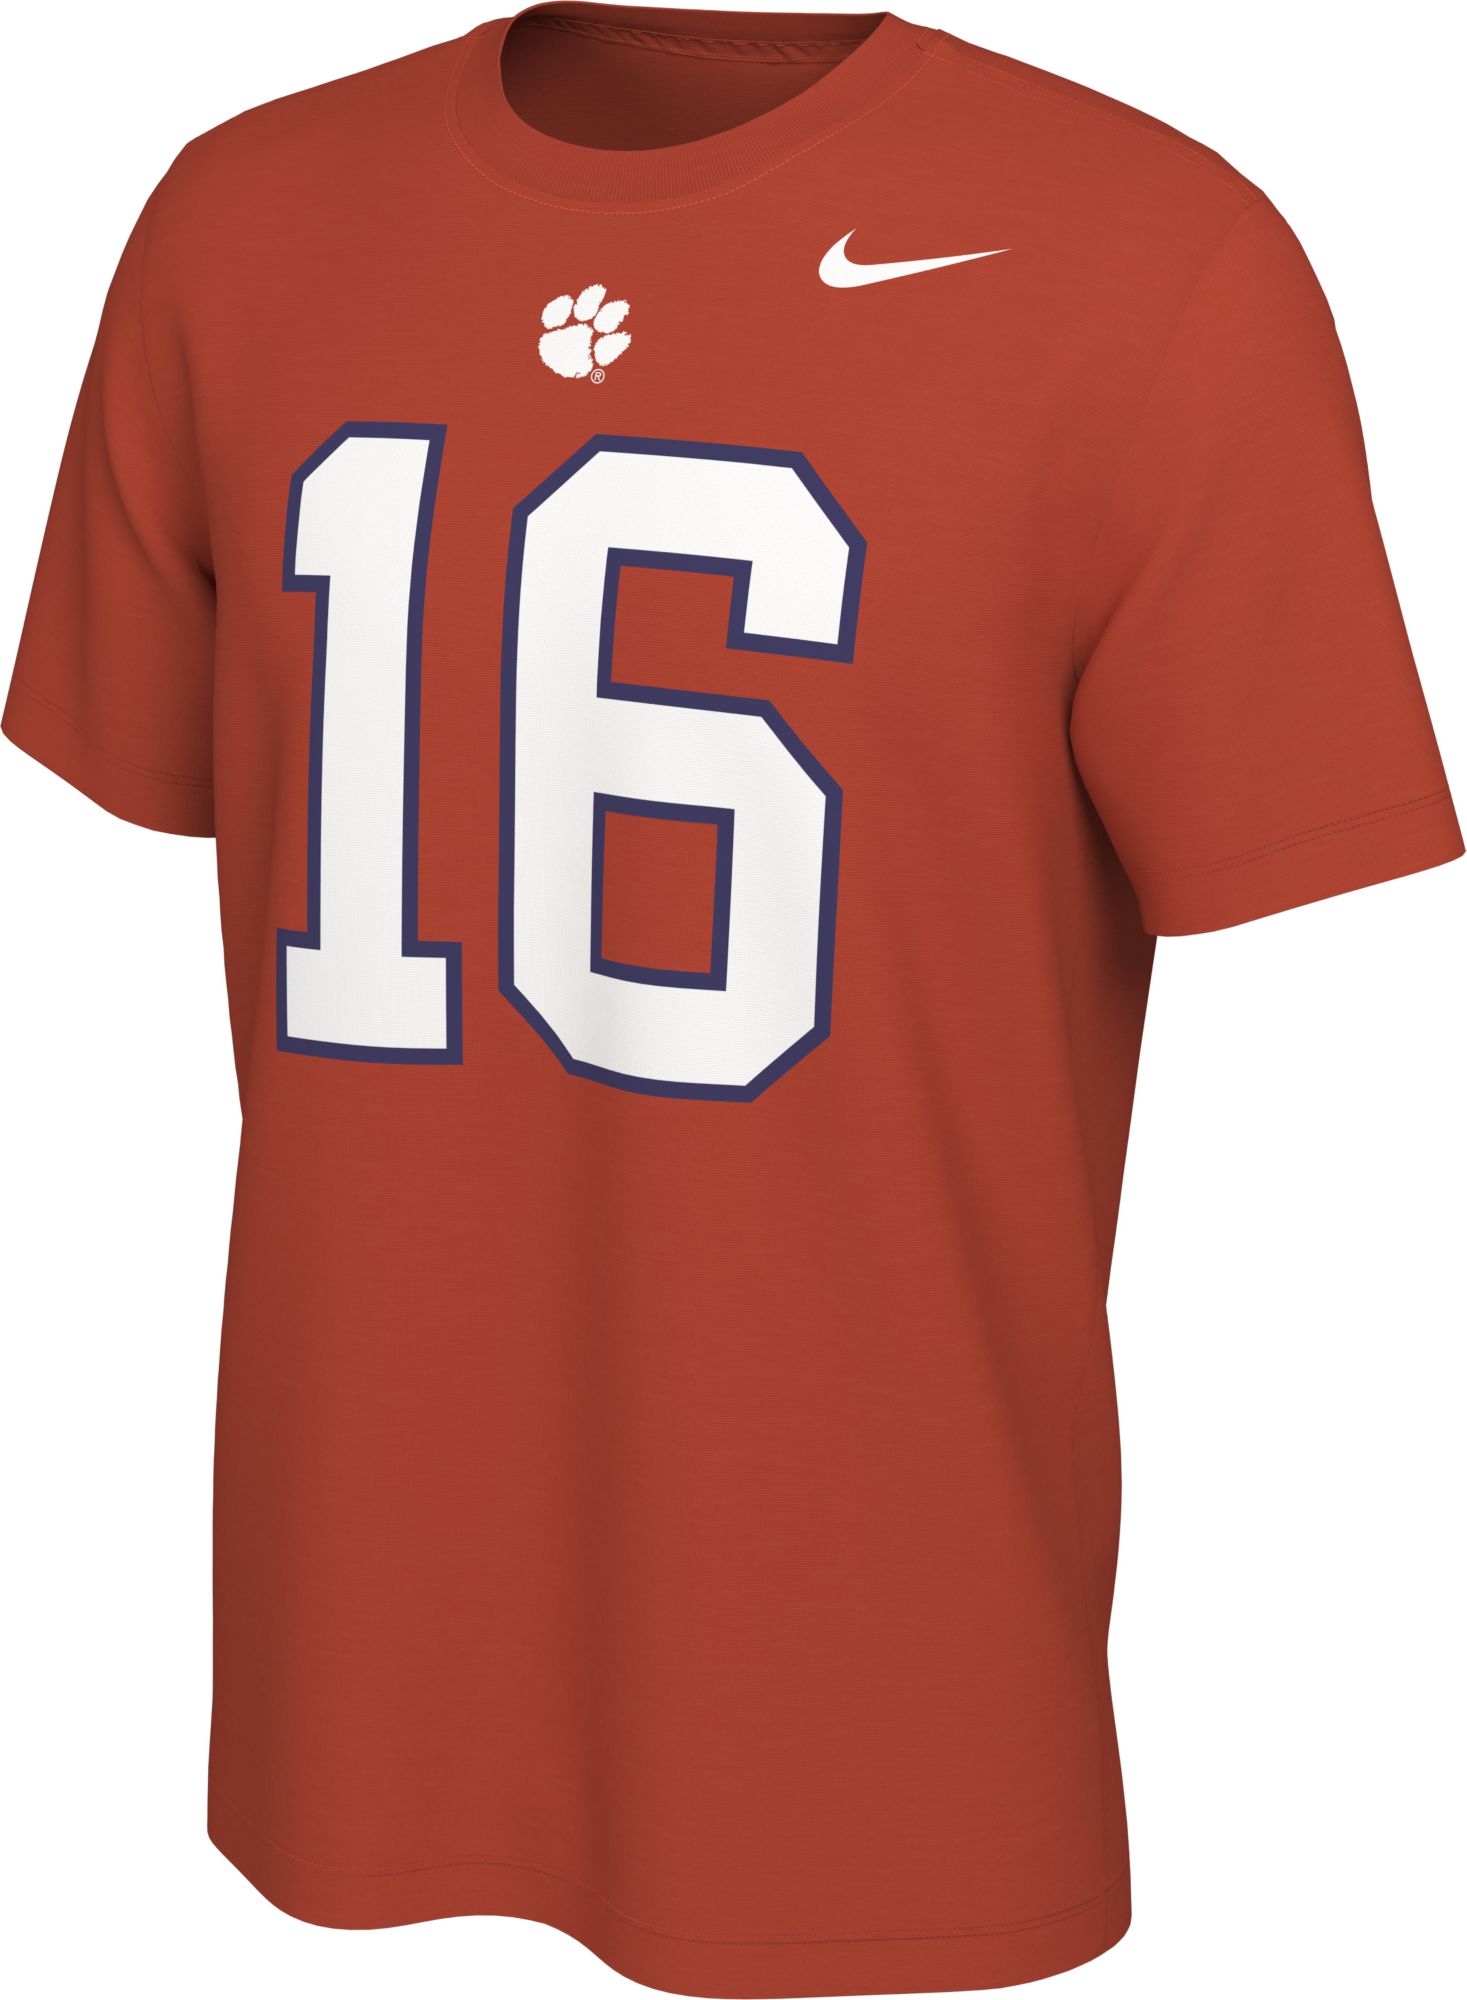 Clemson Tigers soccer jersey numbers